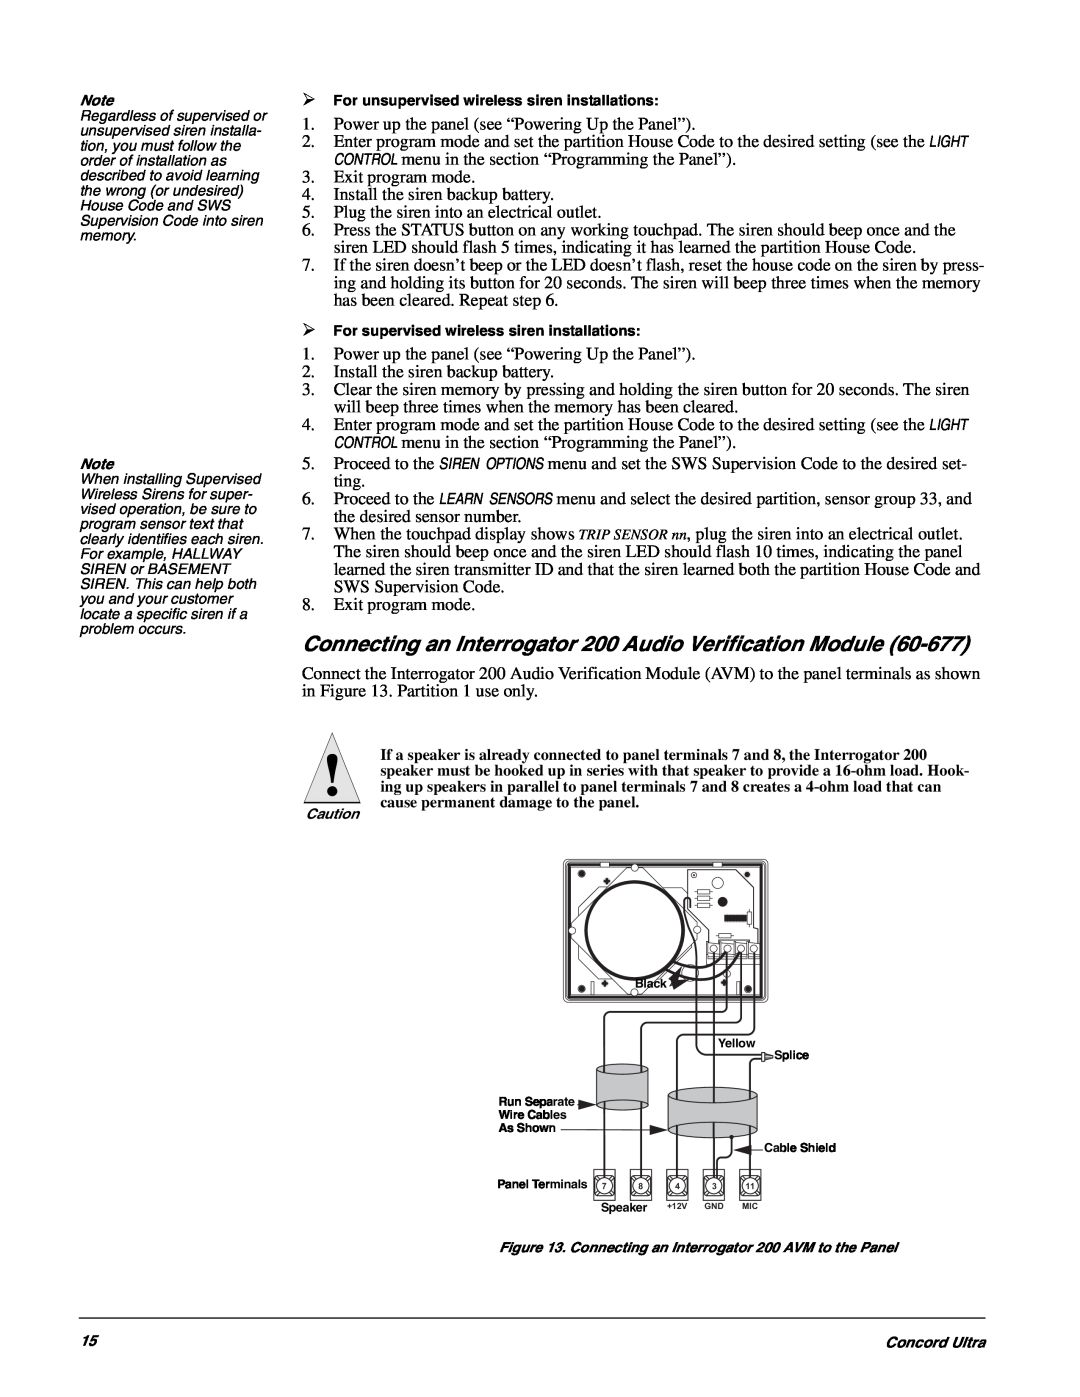 GE 60-960-95 installation instructions Power up the panel see “Powering Up the Panel” 